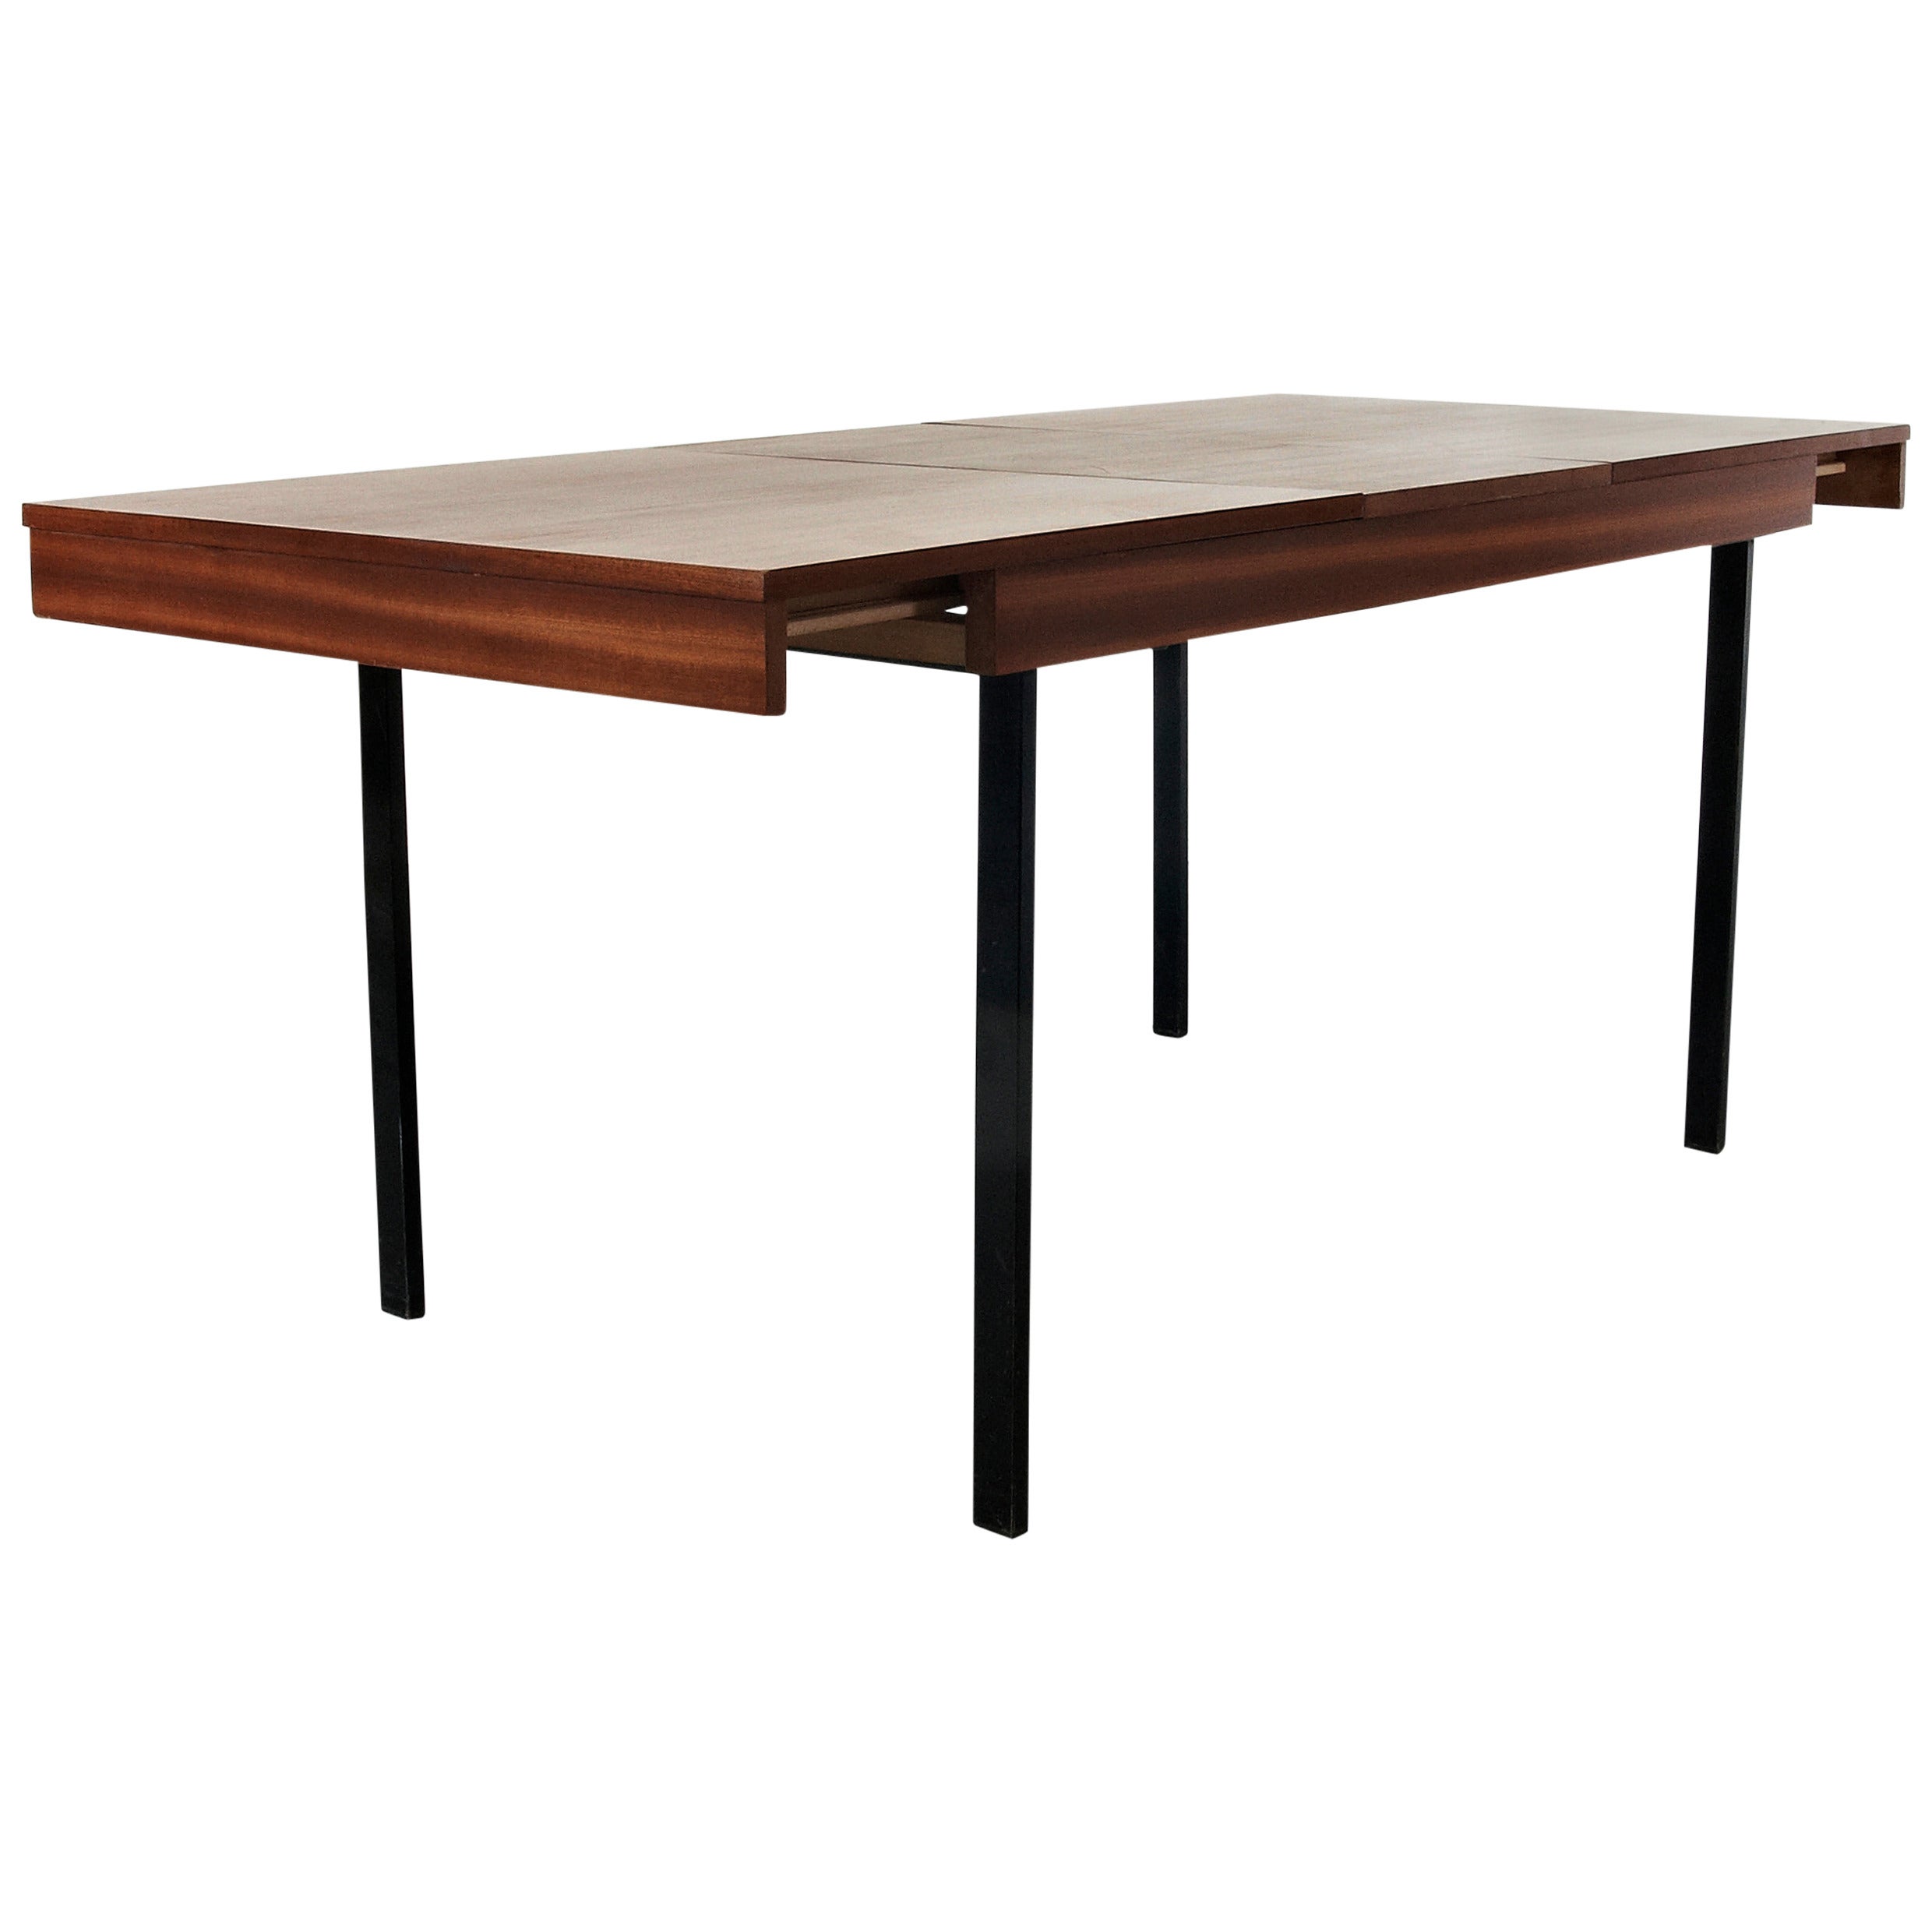 Pierre Guariche Adjustable Extension Dining Table for Meurop, circa 1950